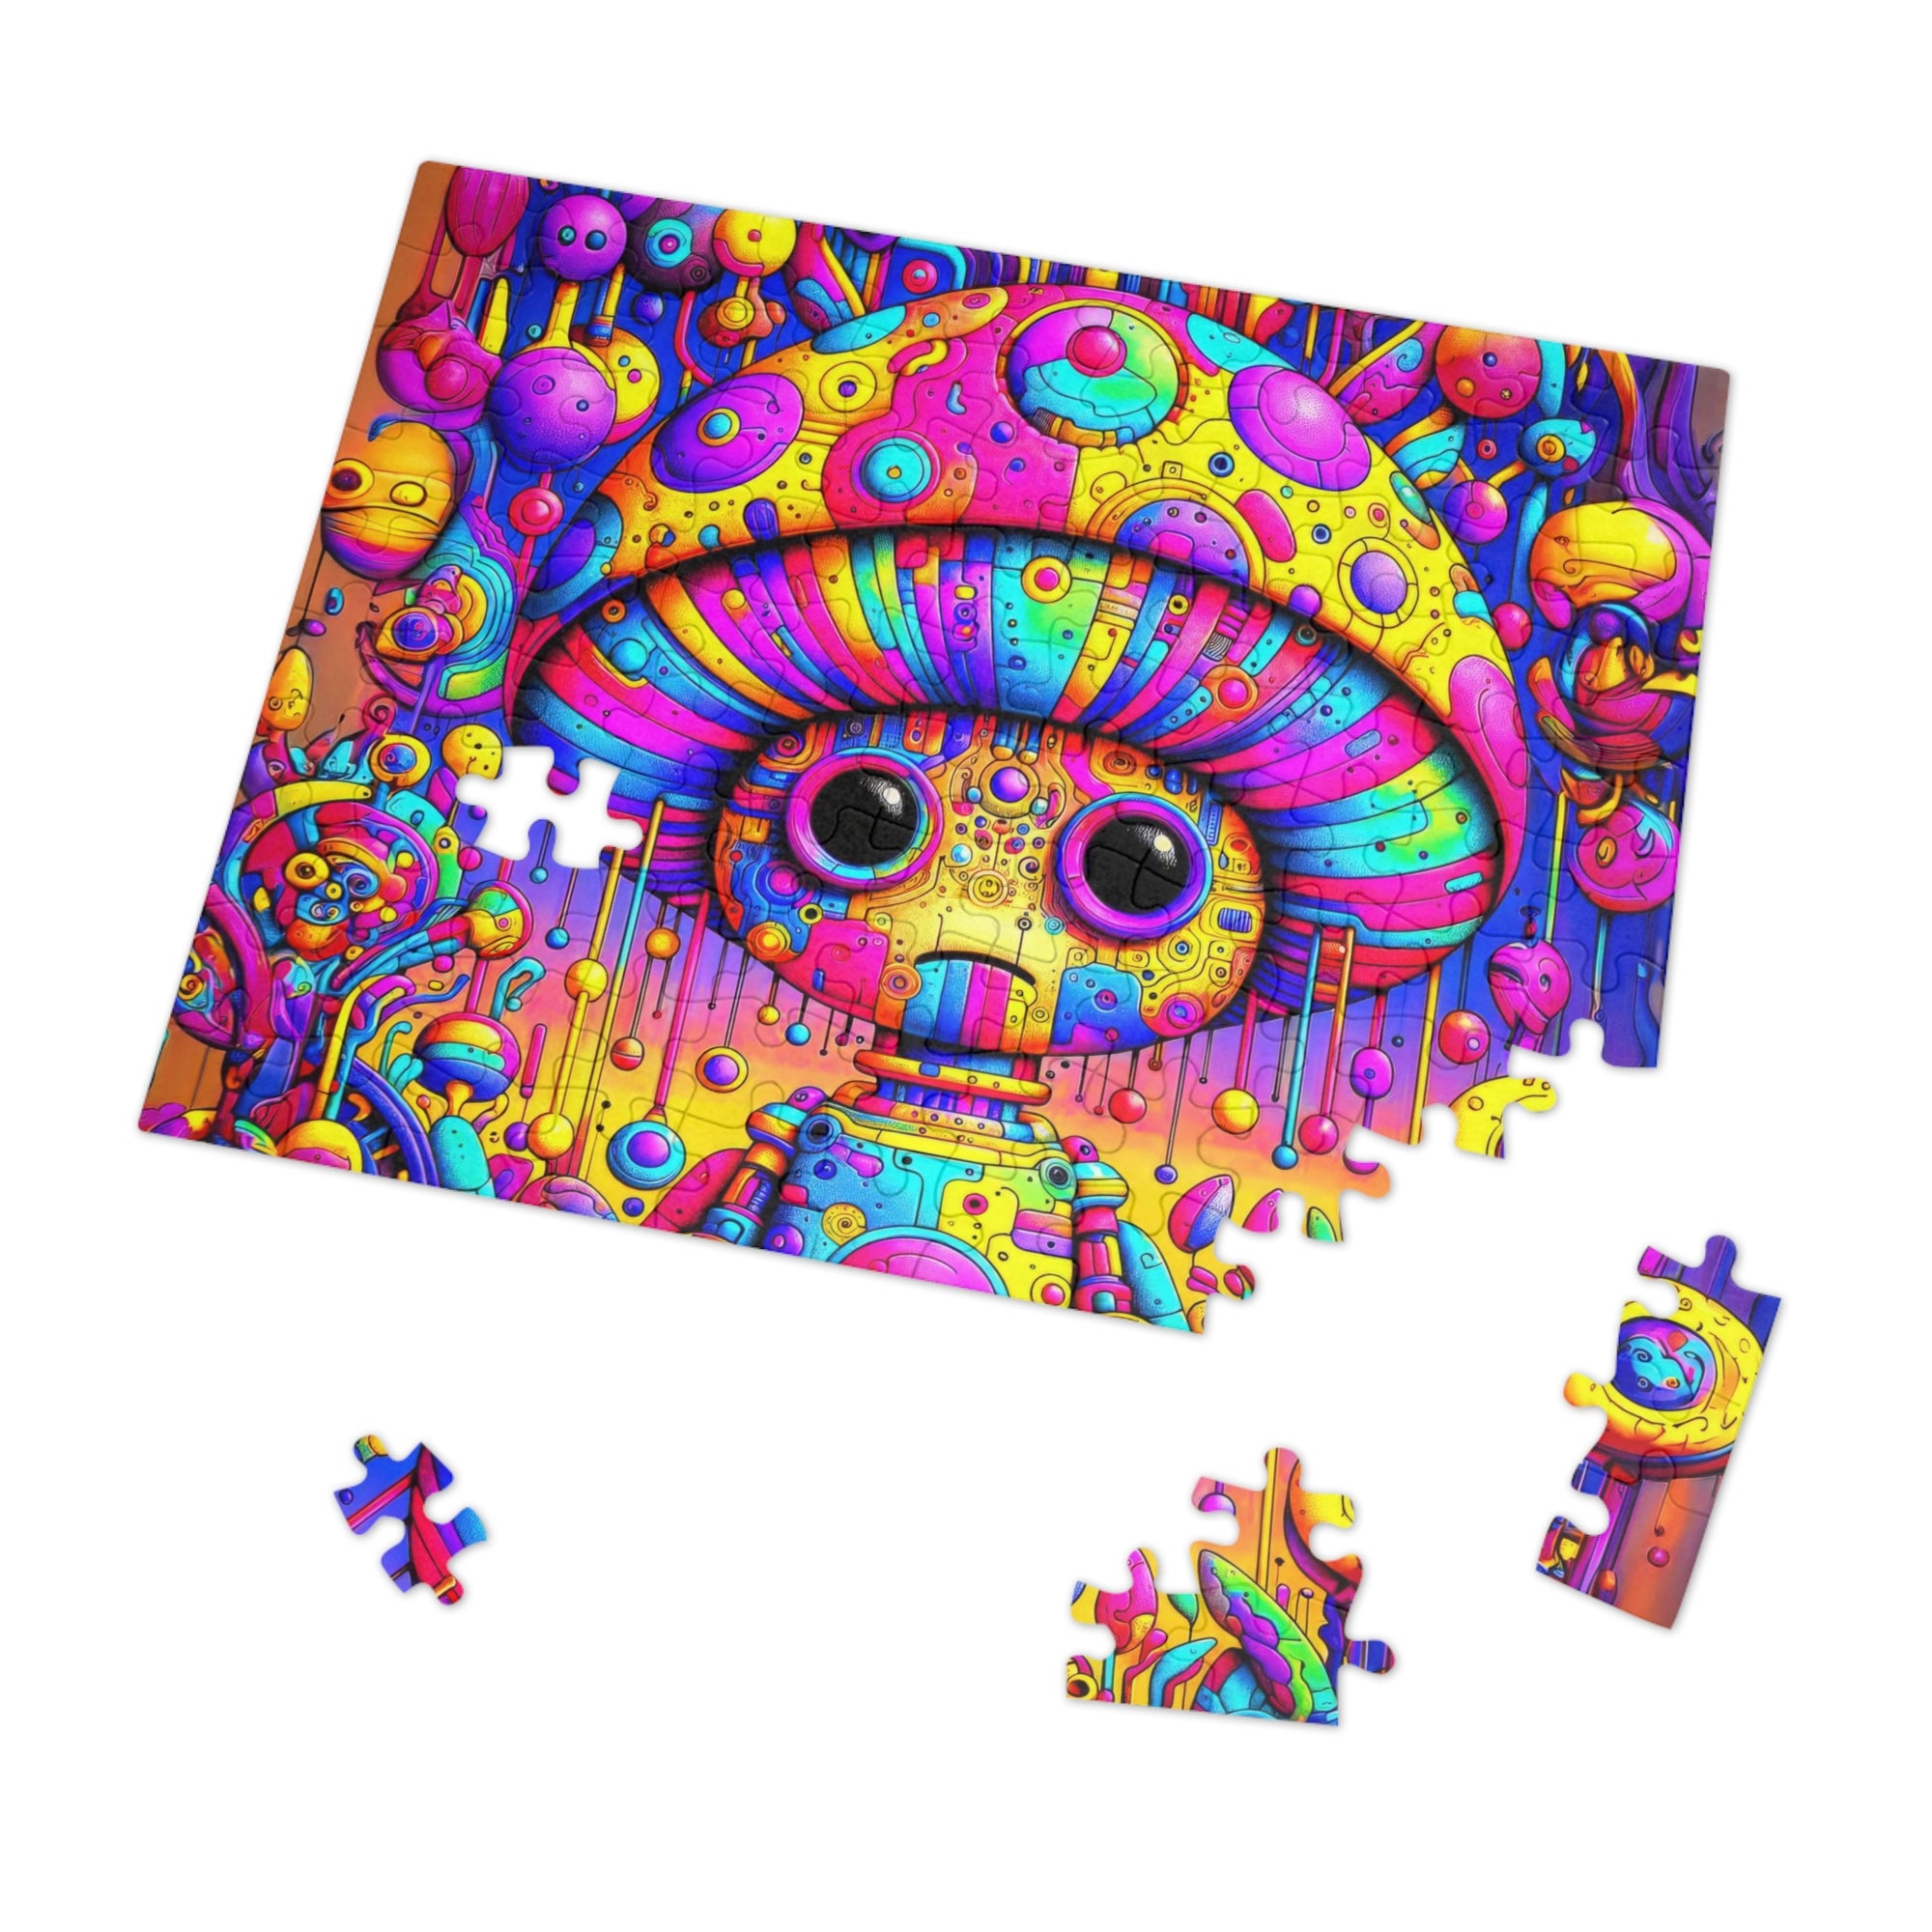 The Cosmic Marionette Puzzle